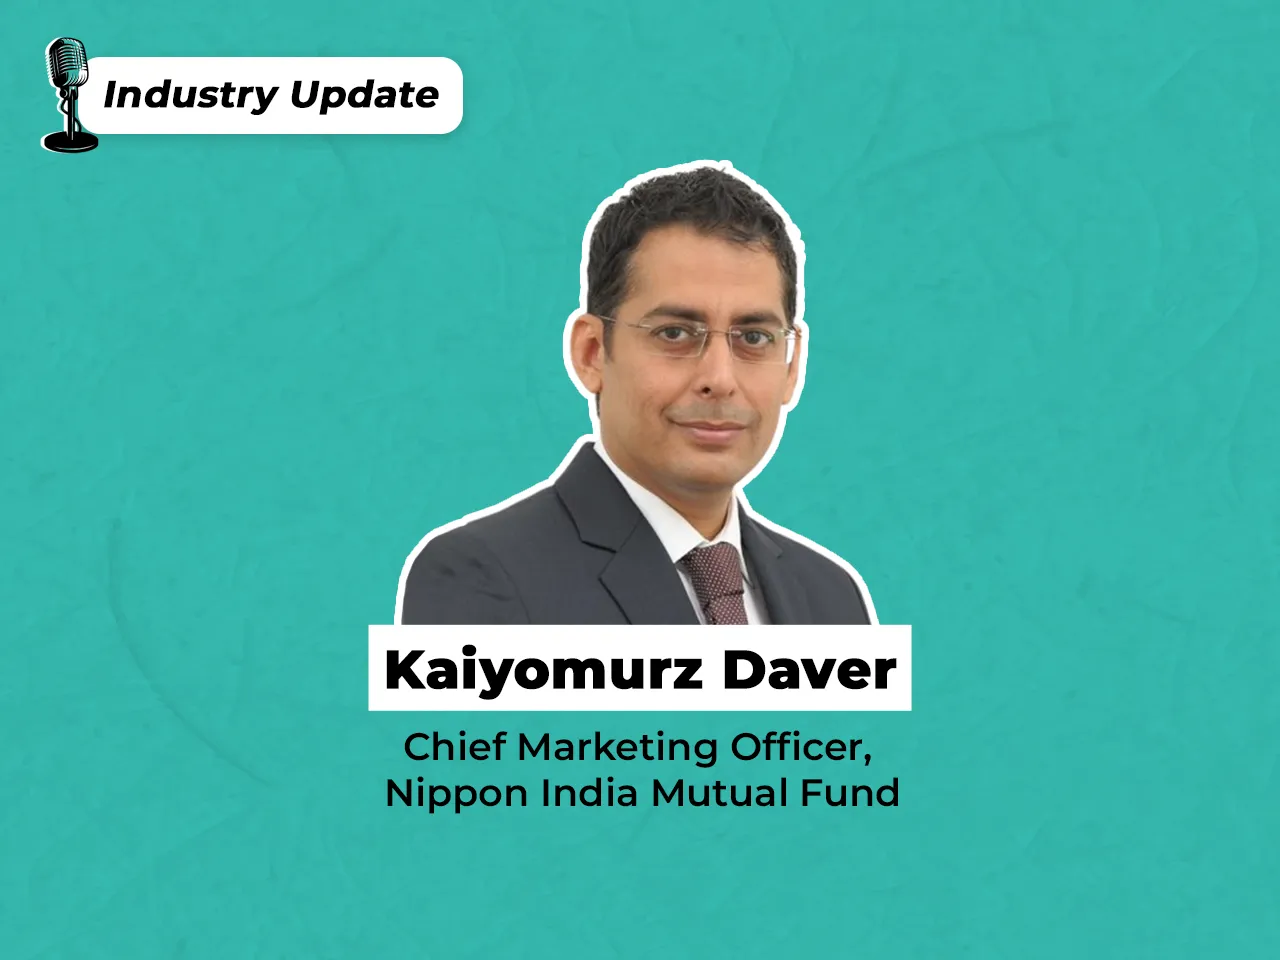 Nippon India Mutual Fund appoints Kaiyomurz Daver as Chief Marketing Officer